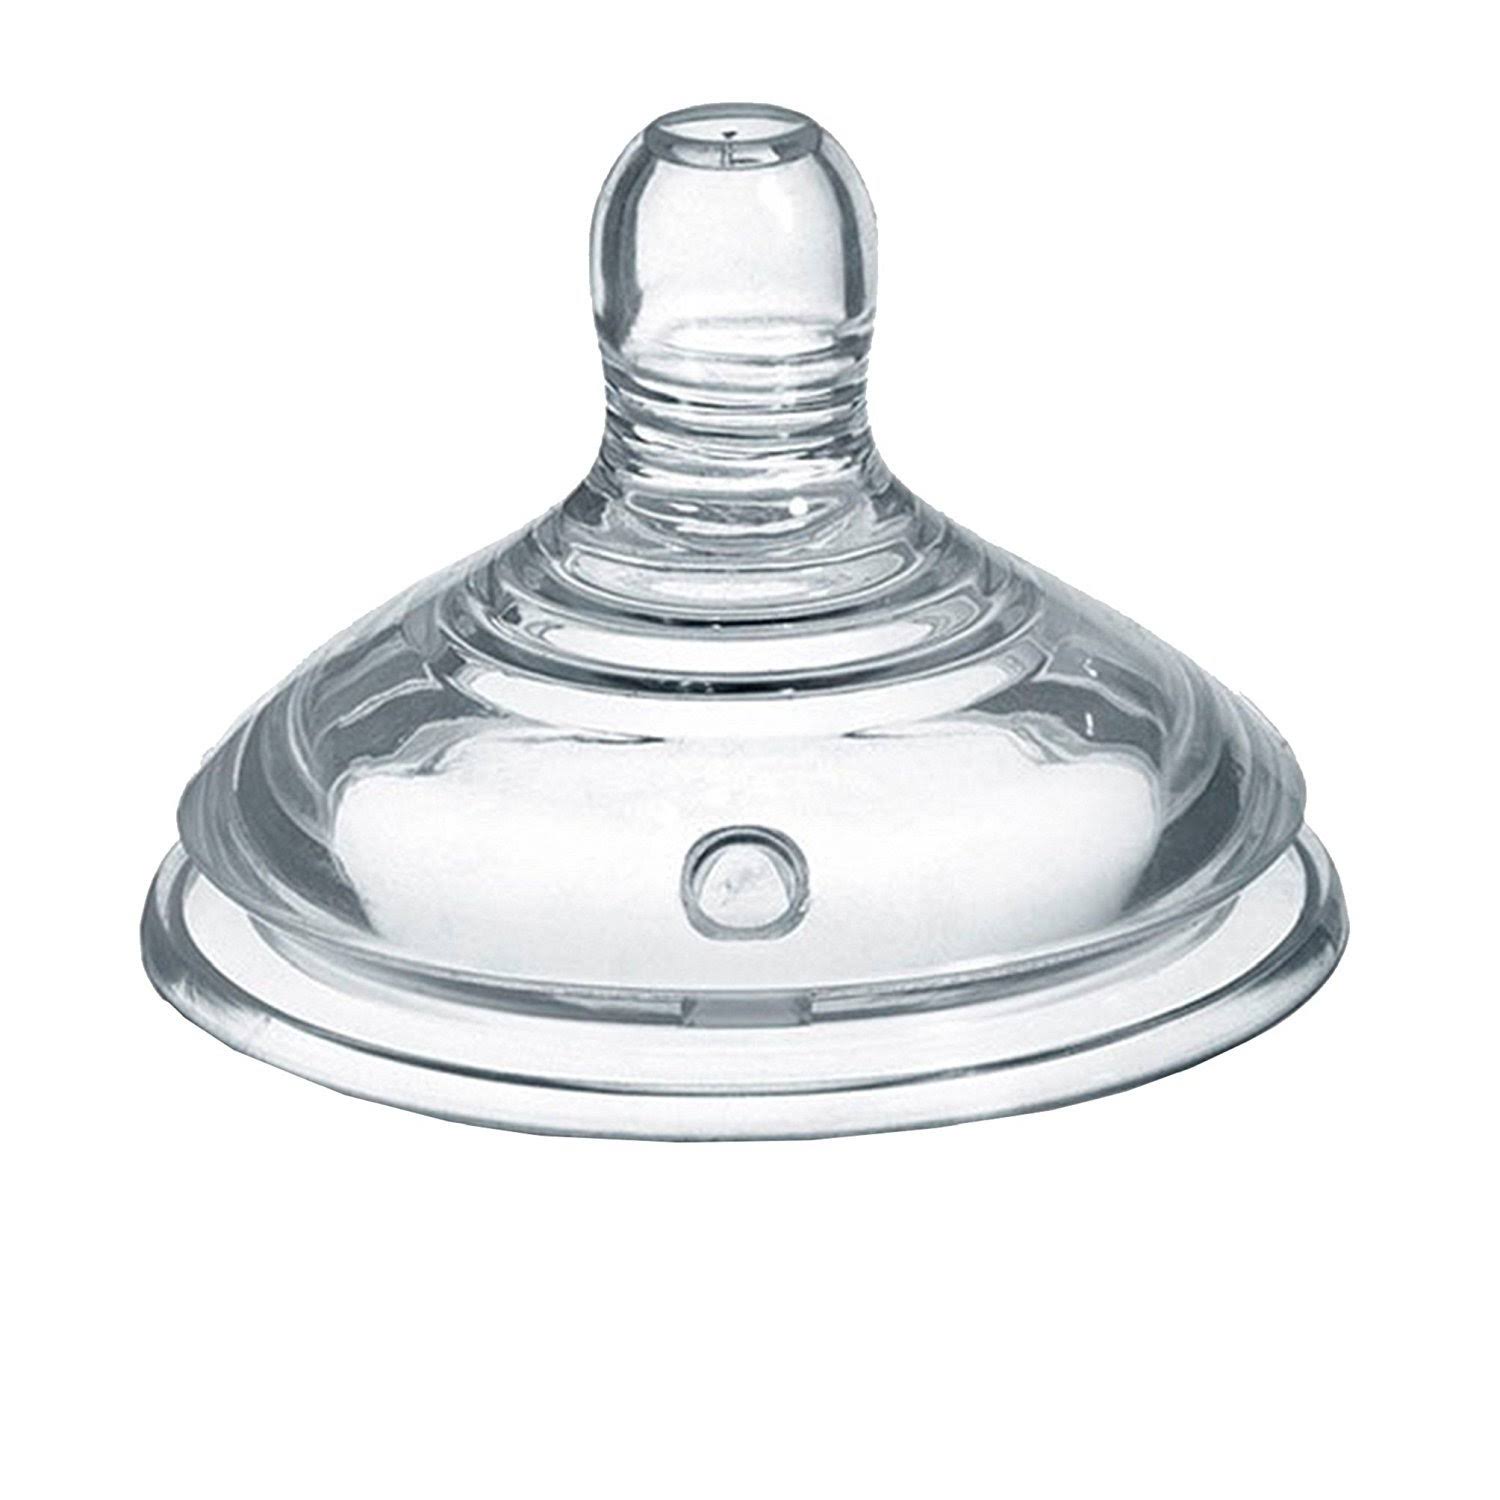 Tommee Tippee Closer to Nature Slow Flow Teats - Clear, 0 Months +, 2pk